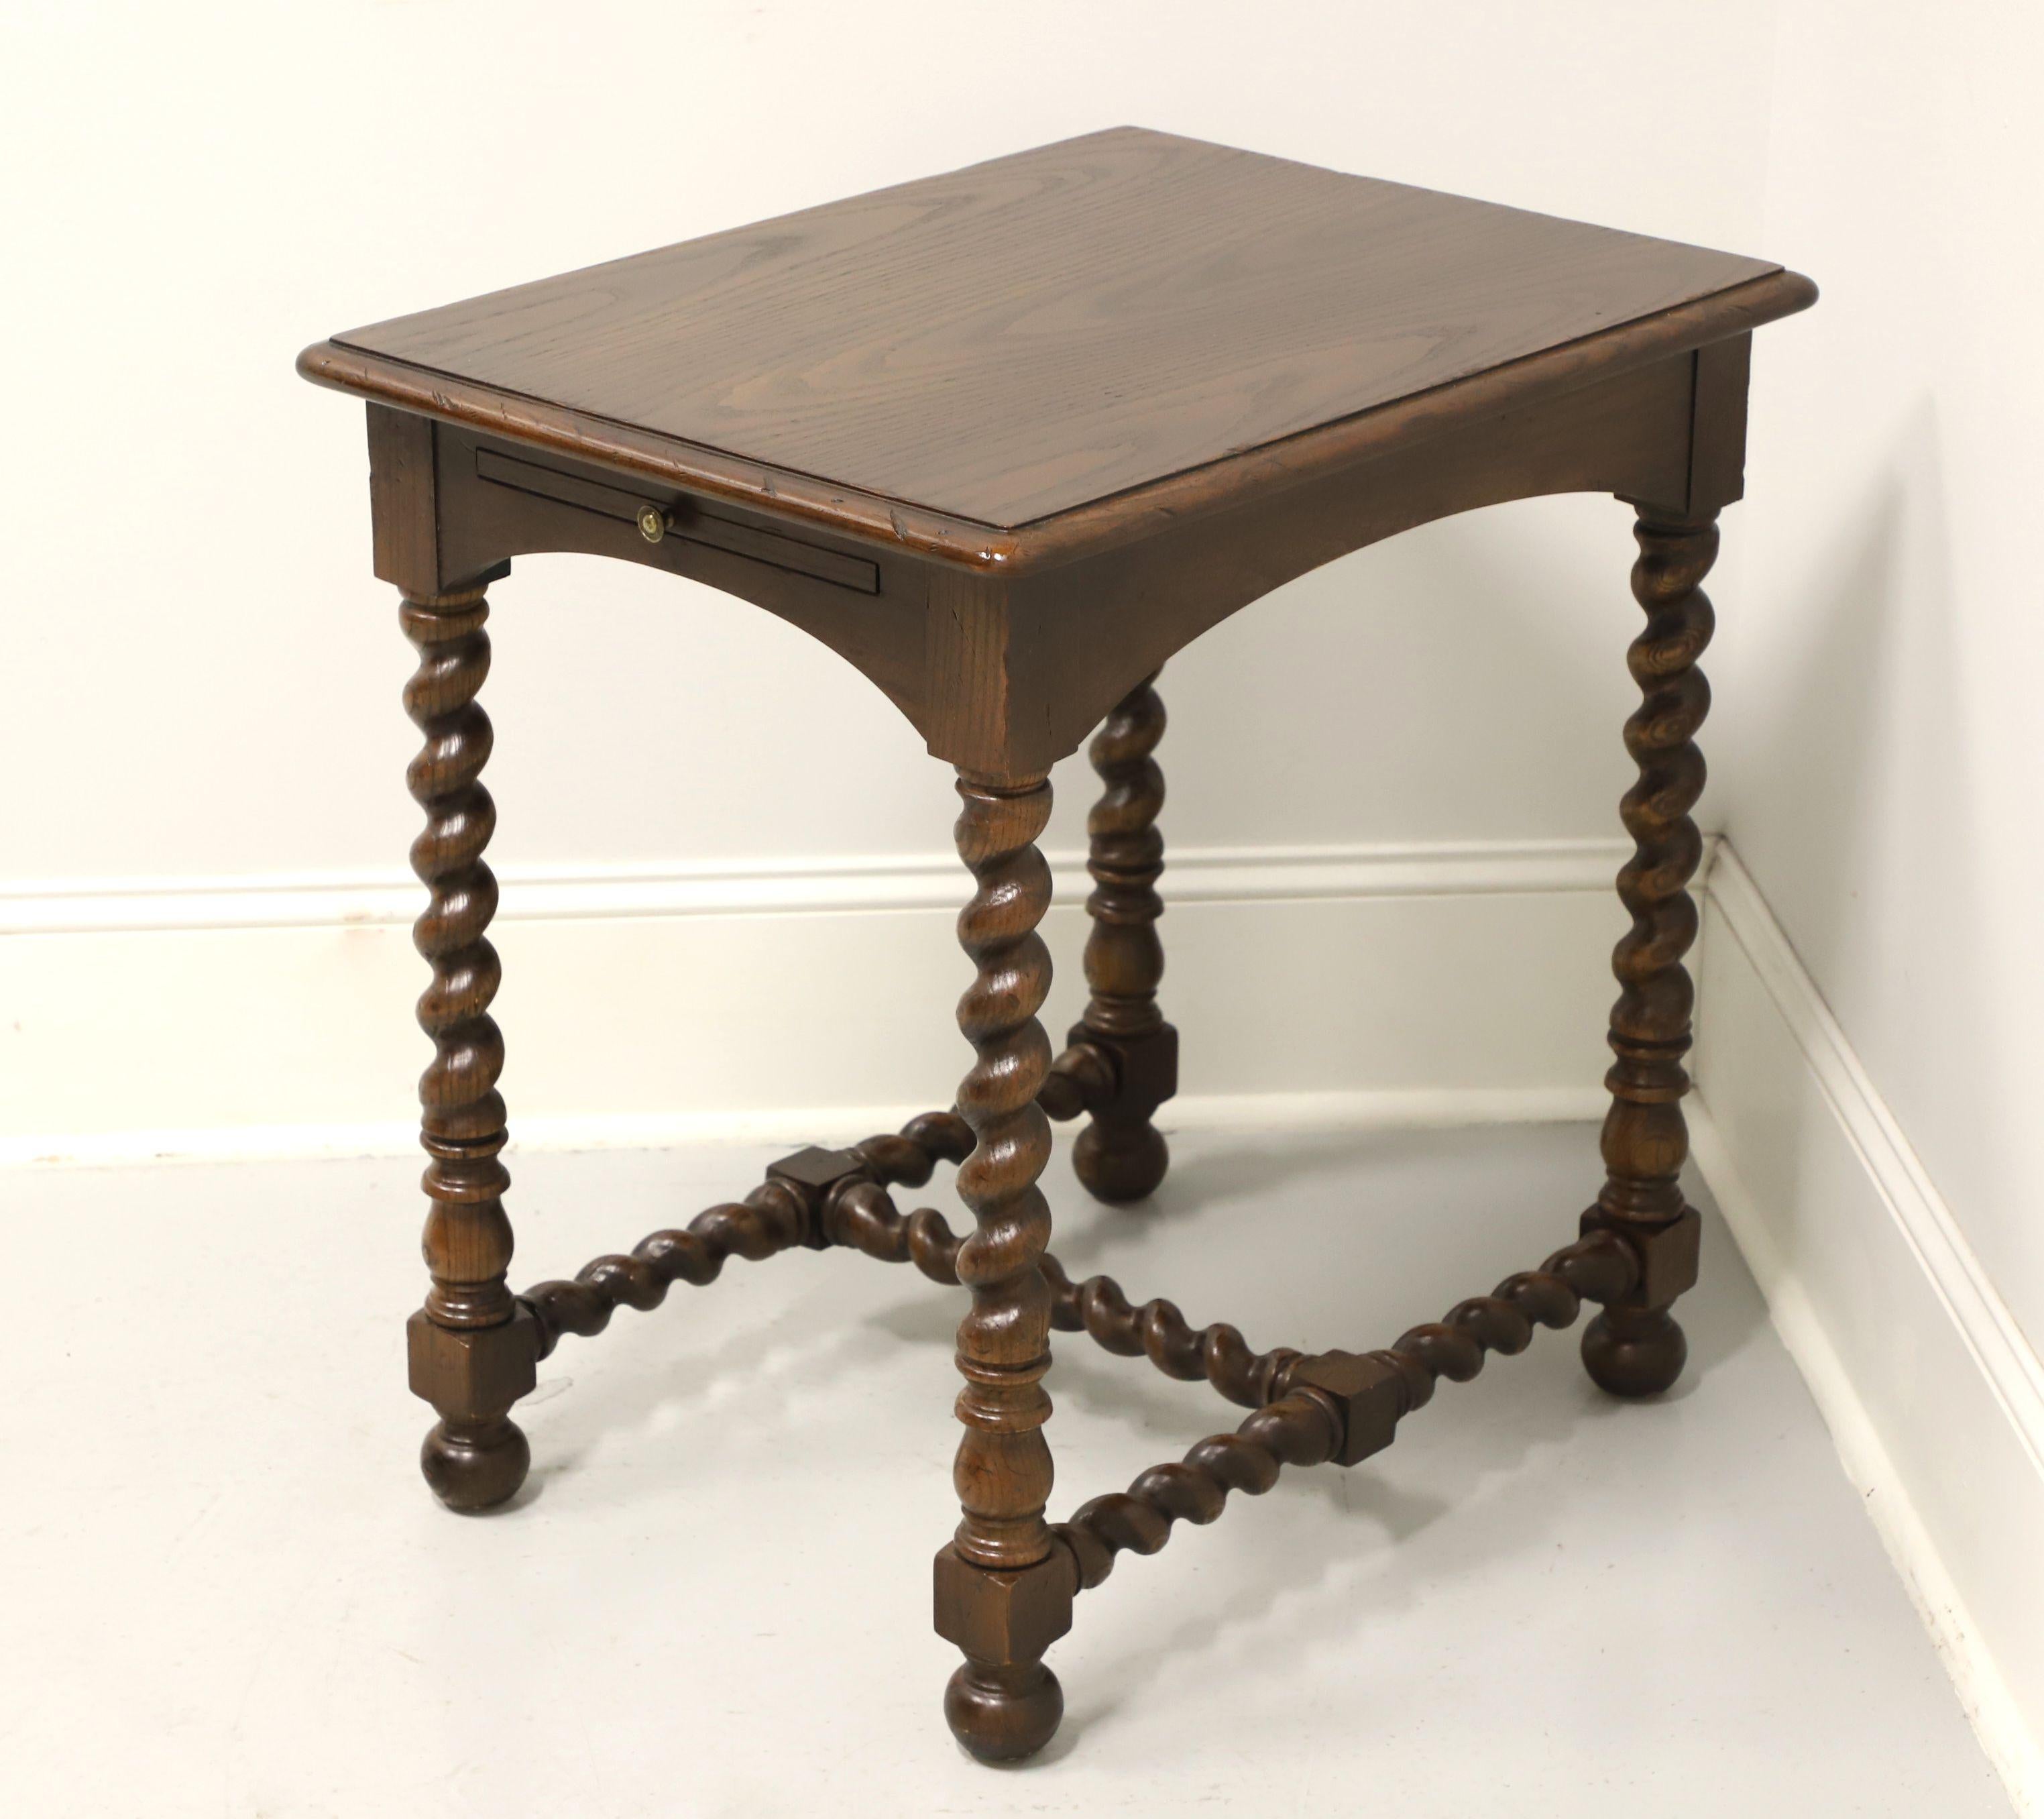 French Provincial HENREDON Dark Oak French Country Side Table with Barley Twist Legs & Stretcher